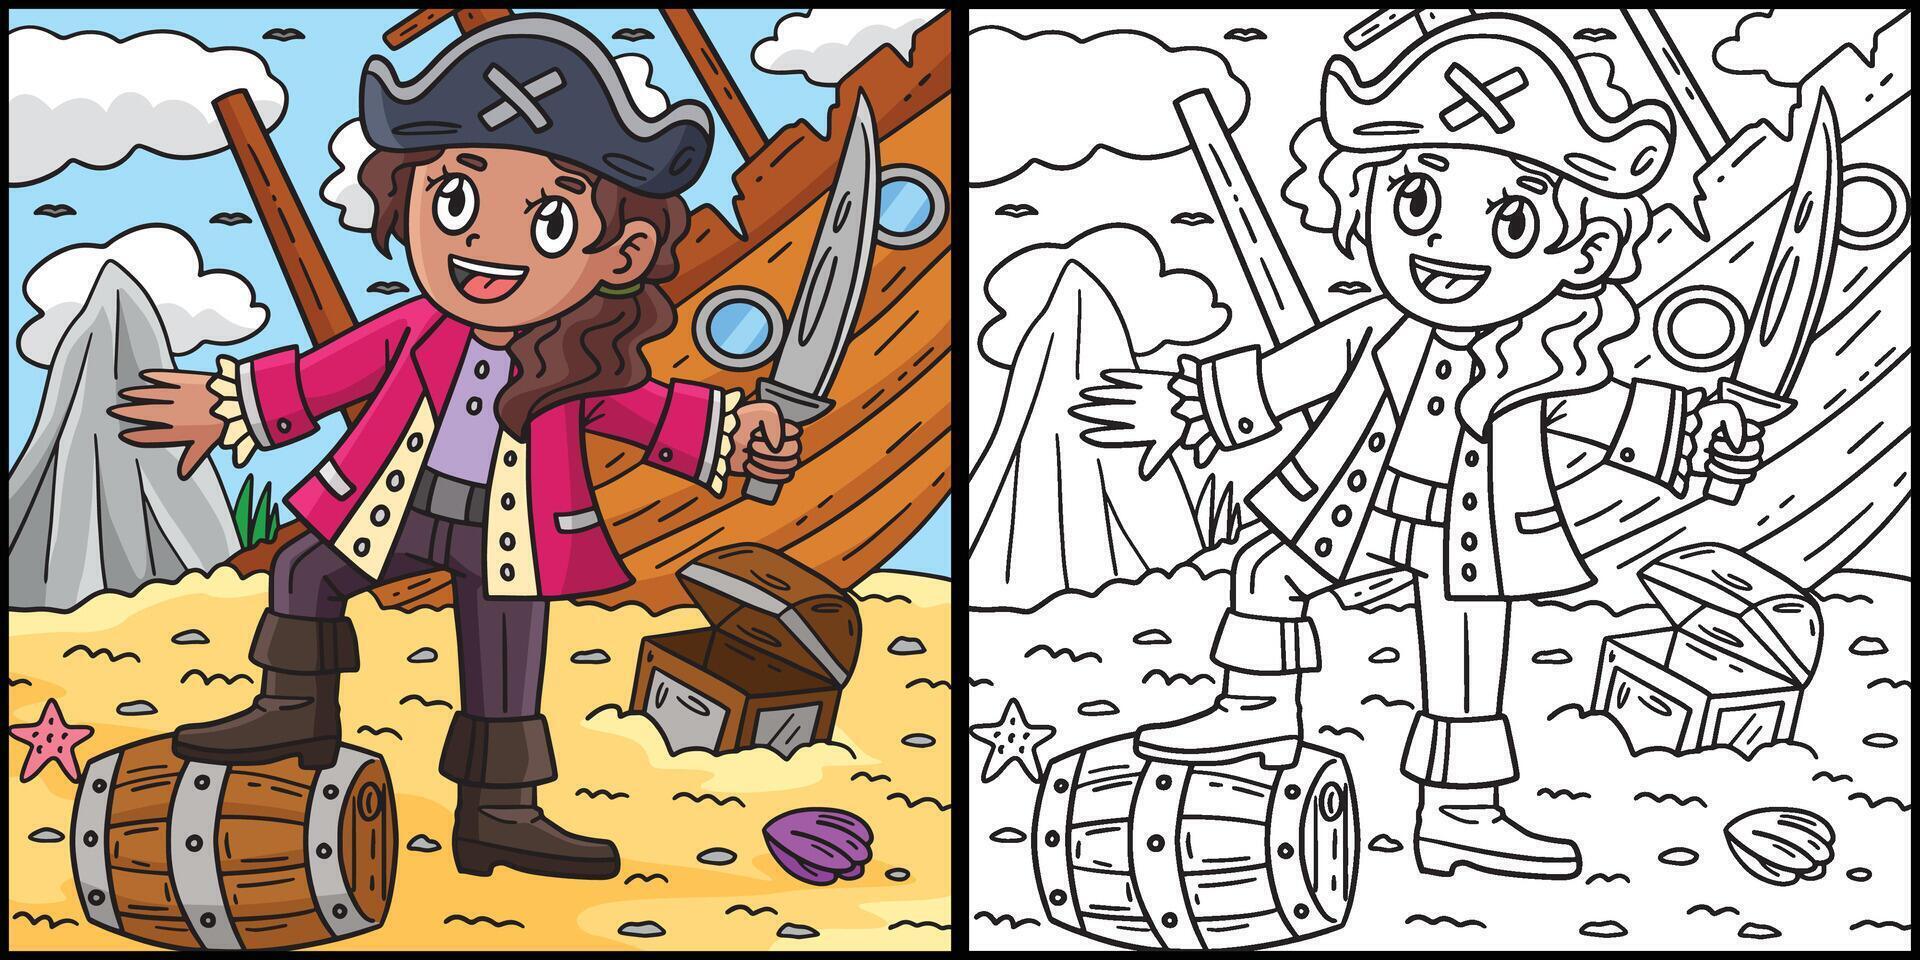 Female Pirate with Cutlass Coloring Illustration vector